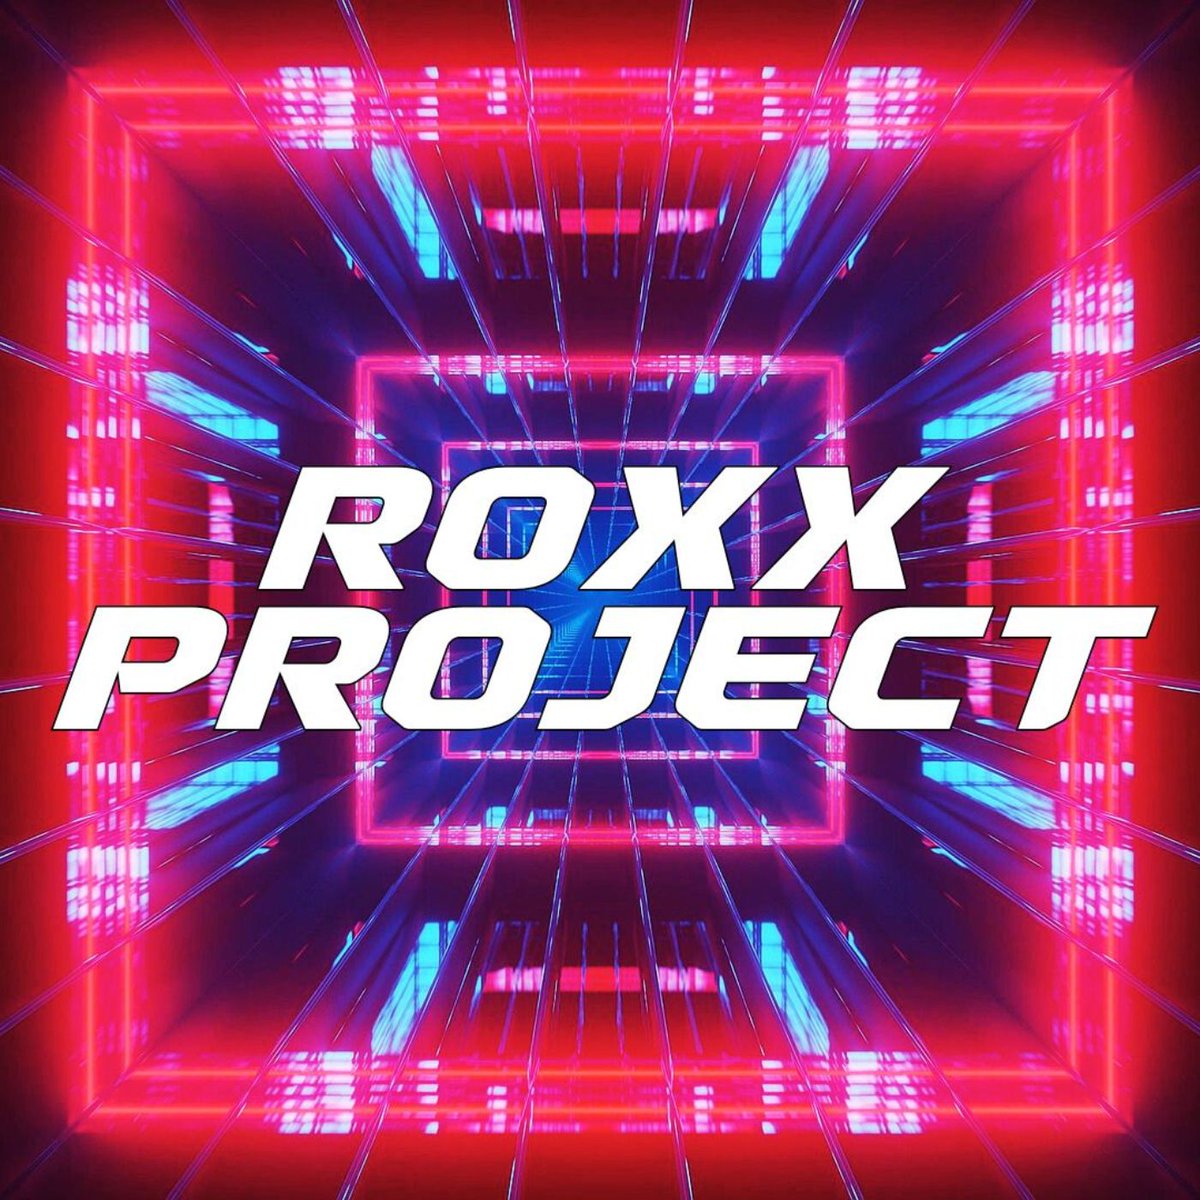 Roxx Project is alive! :) You'll hear the first two tracks soon!🔊🔥 My new music project! Genre: Commercial Trance #commercialtrance #clubmusic #trancemusic #roxxproject #rozbickimusic